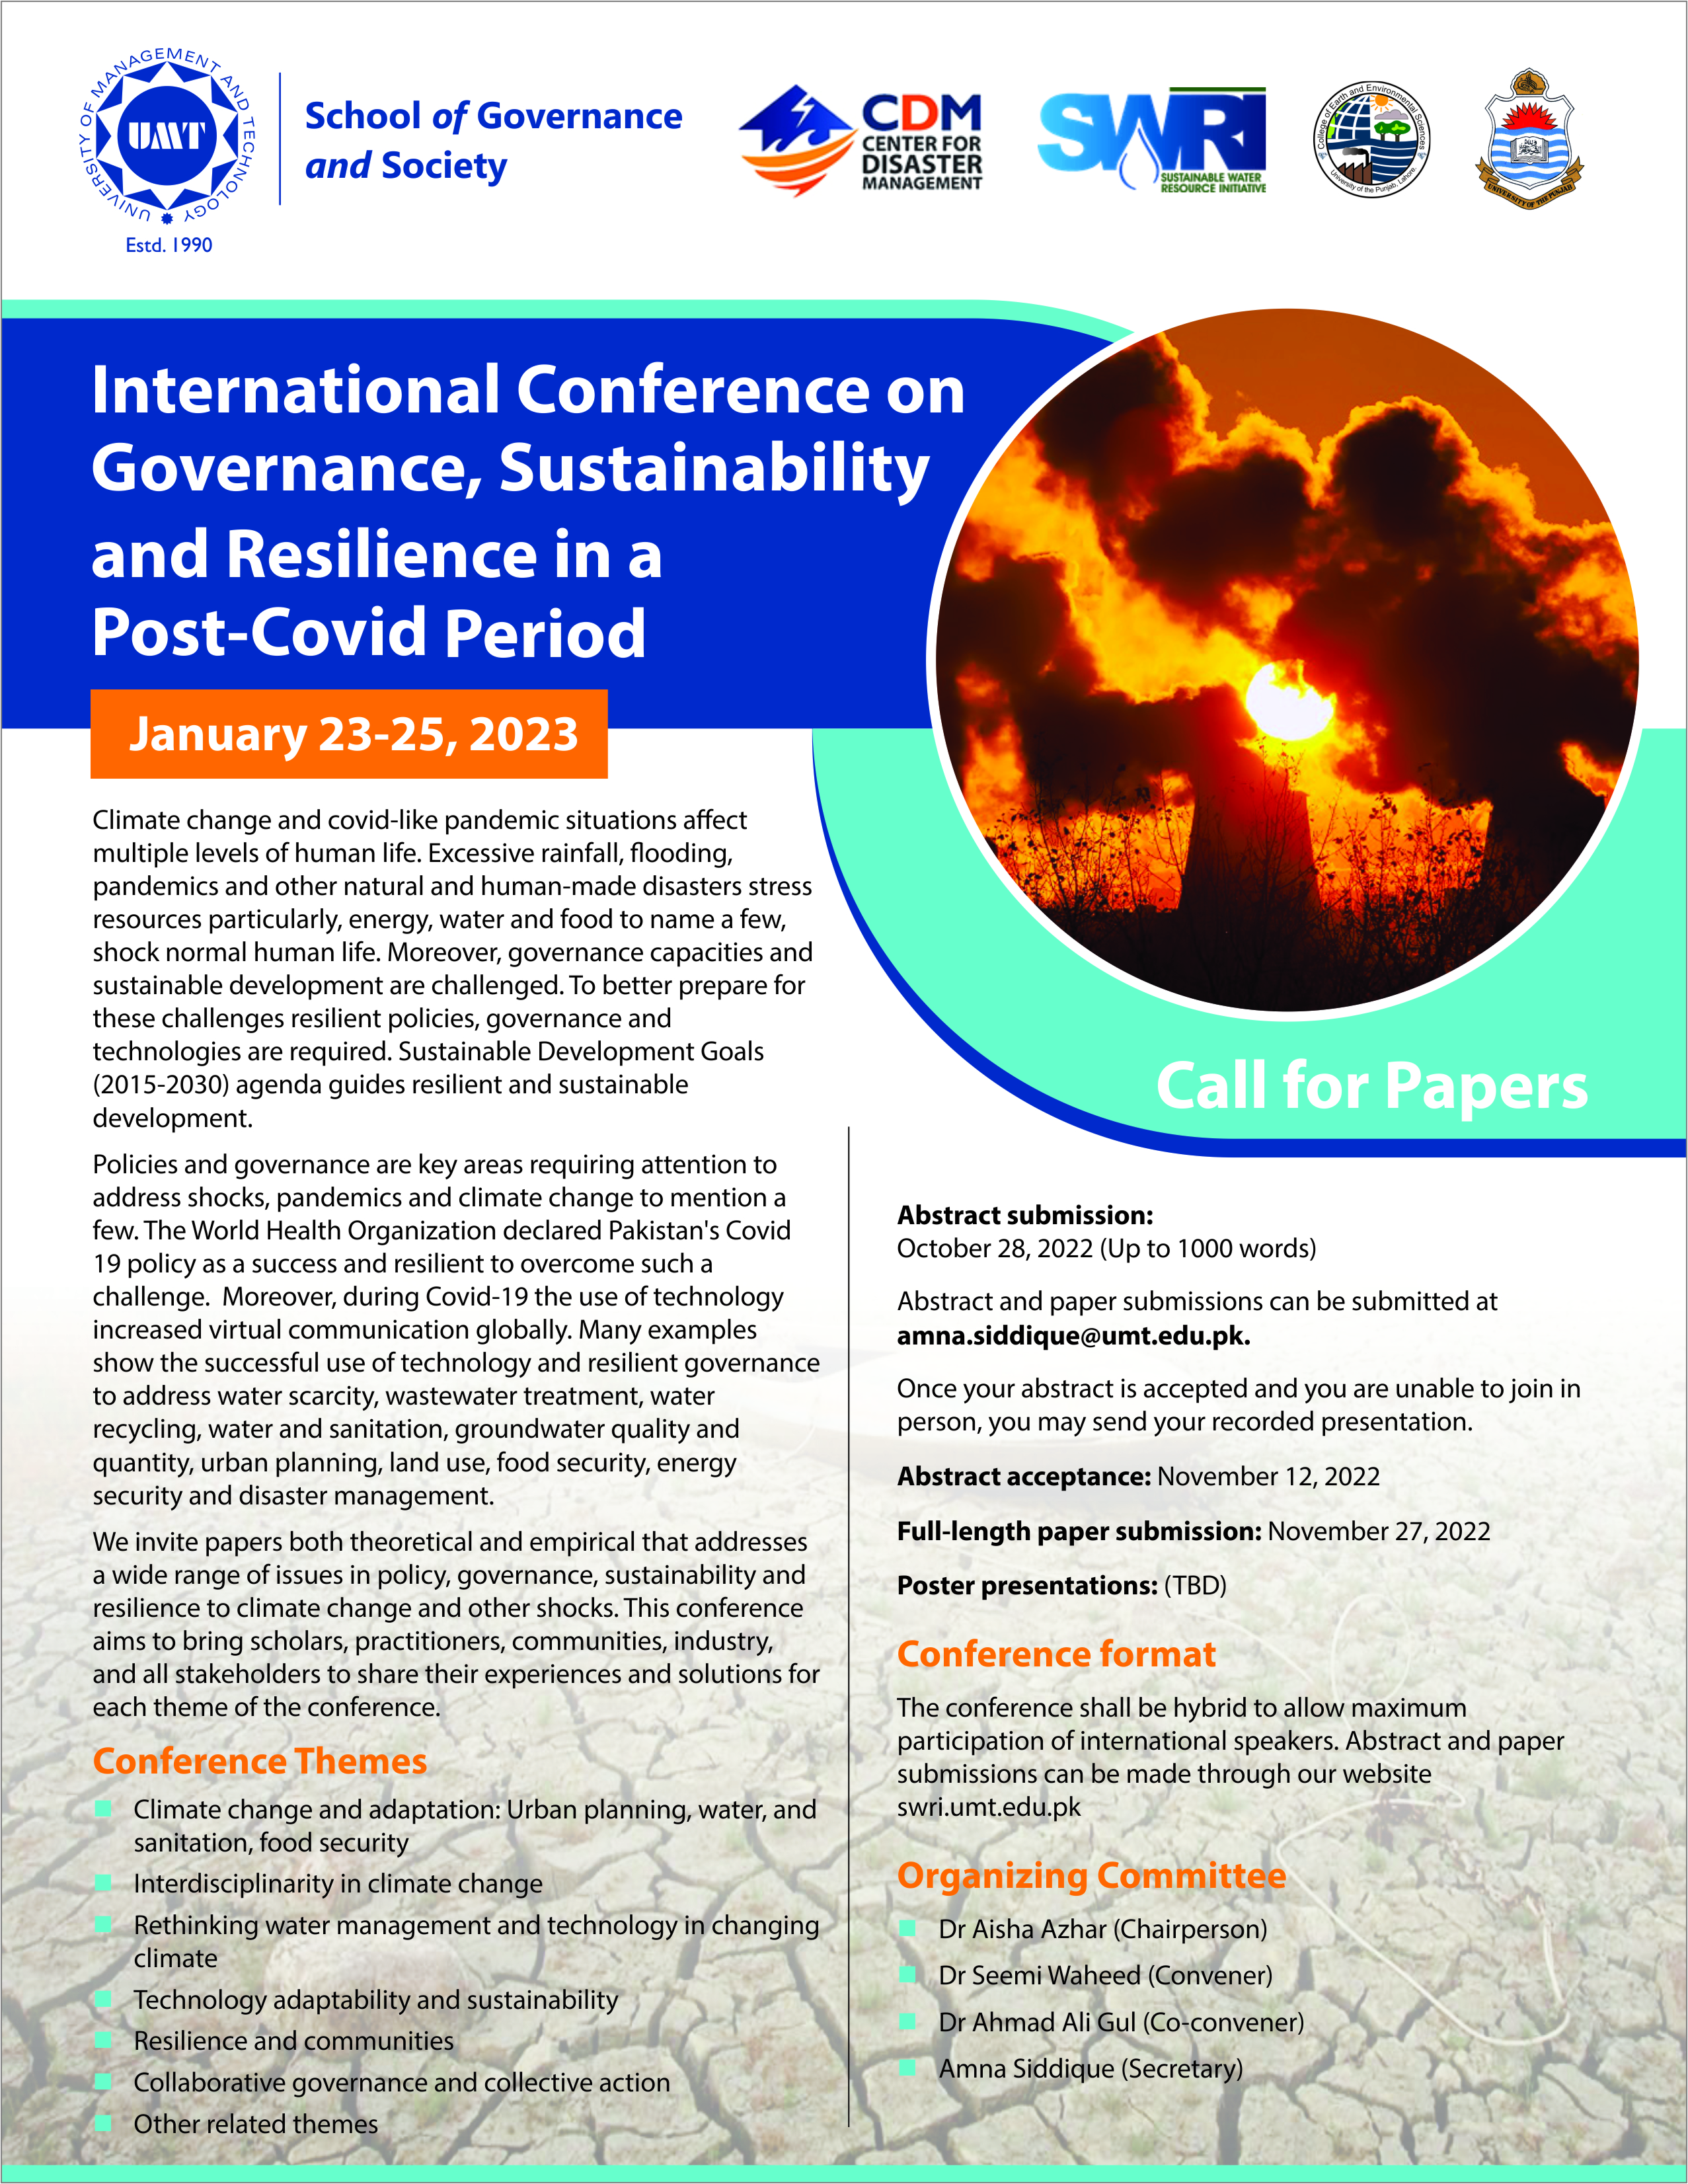 International Conference on Governance, Sustainability, and Resilience in a post-covid period (Hybrid)